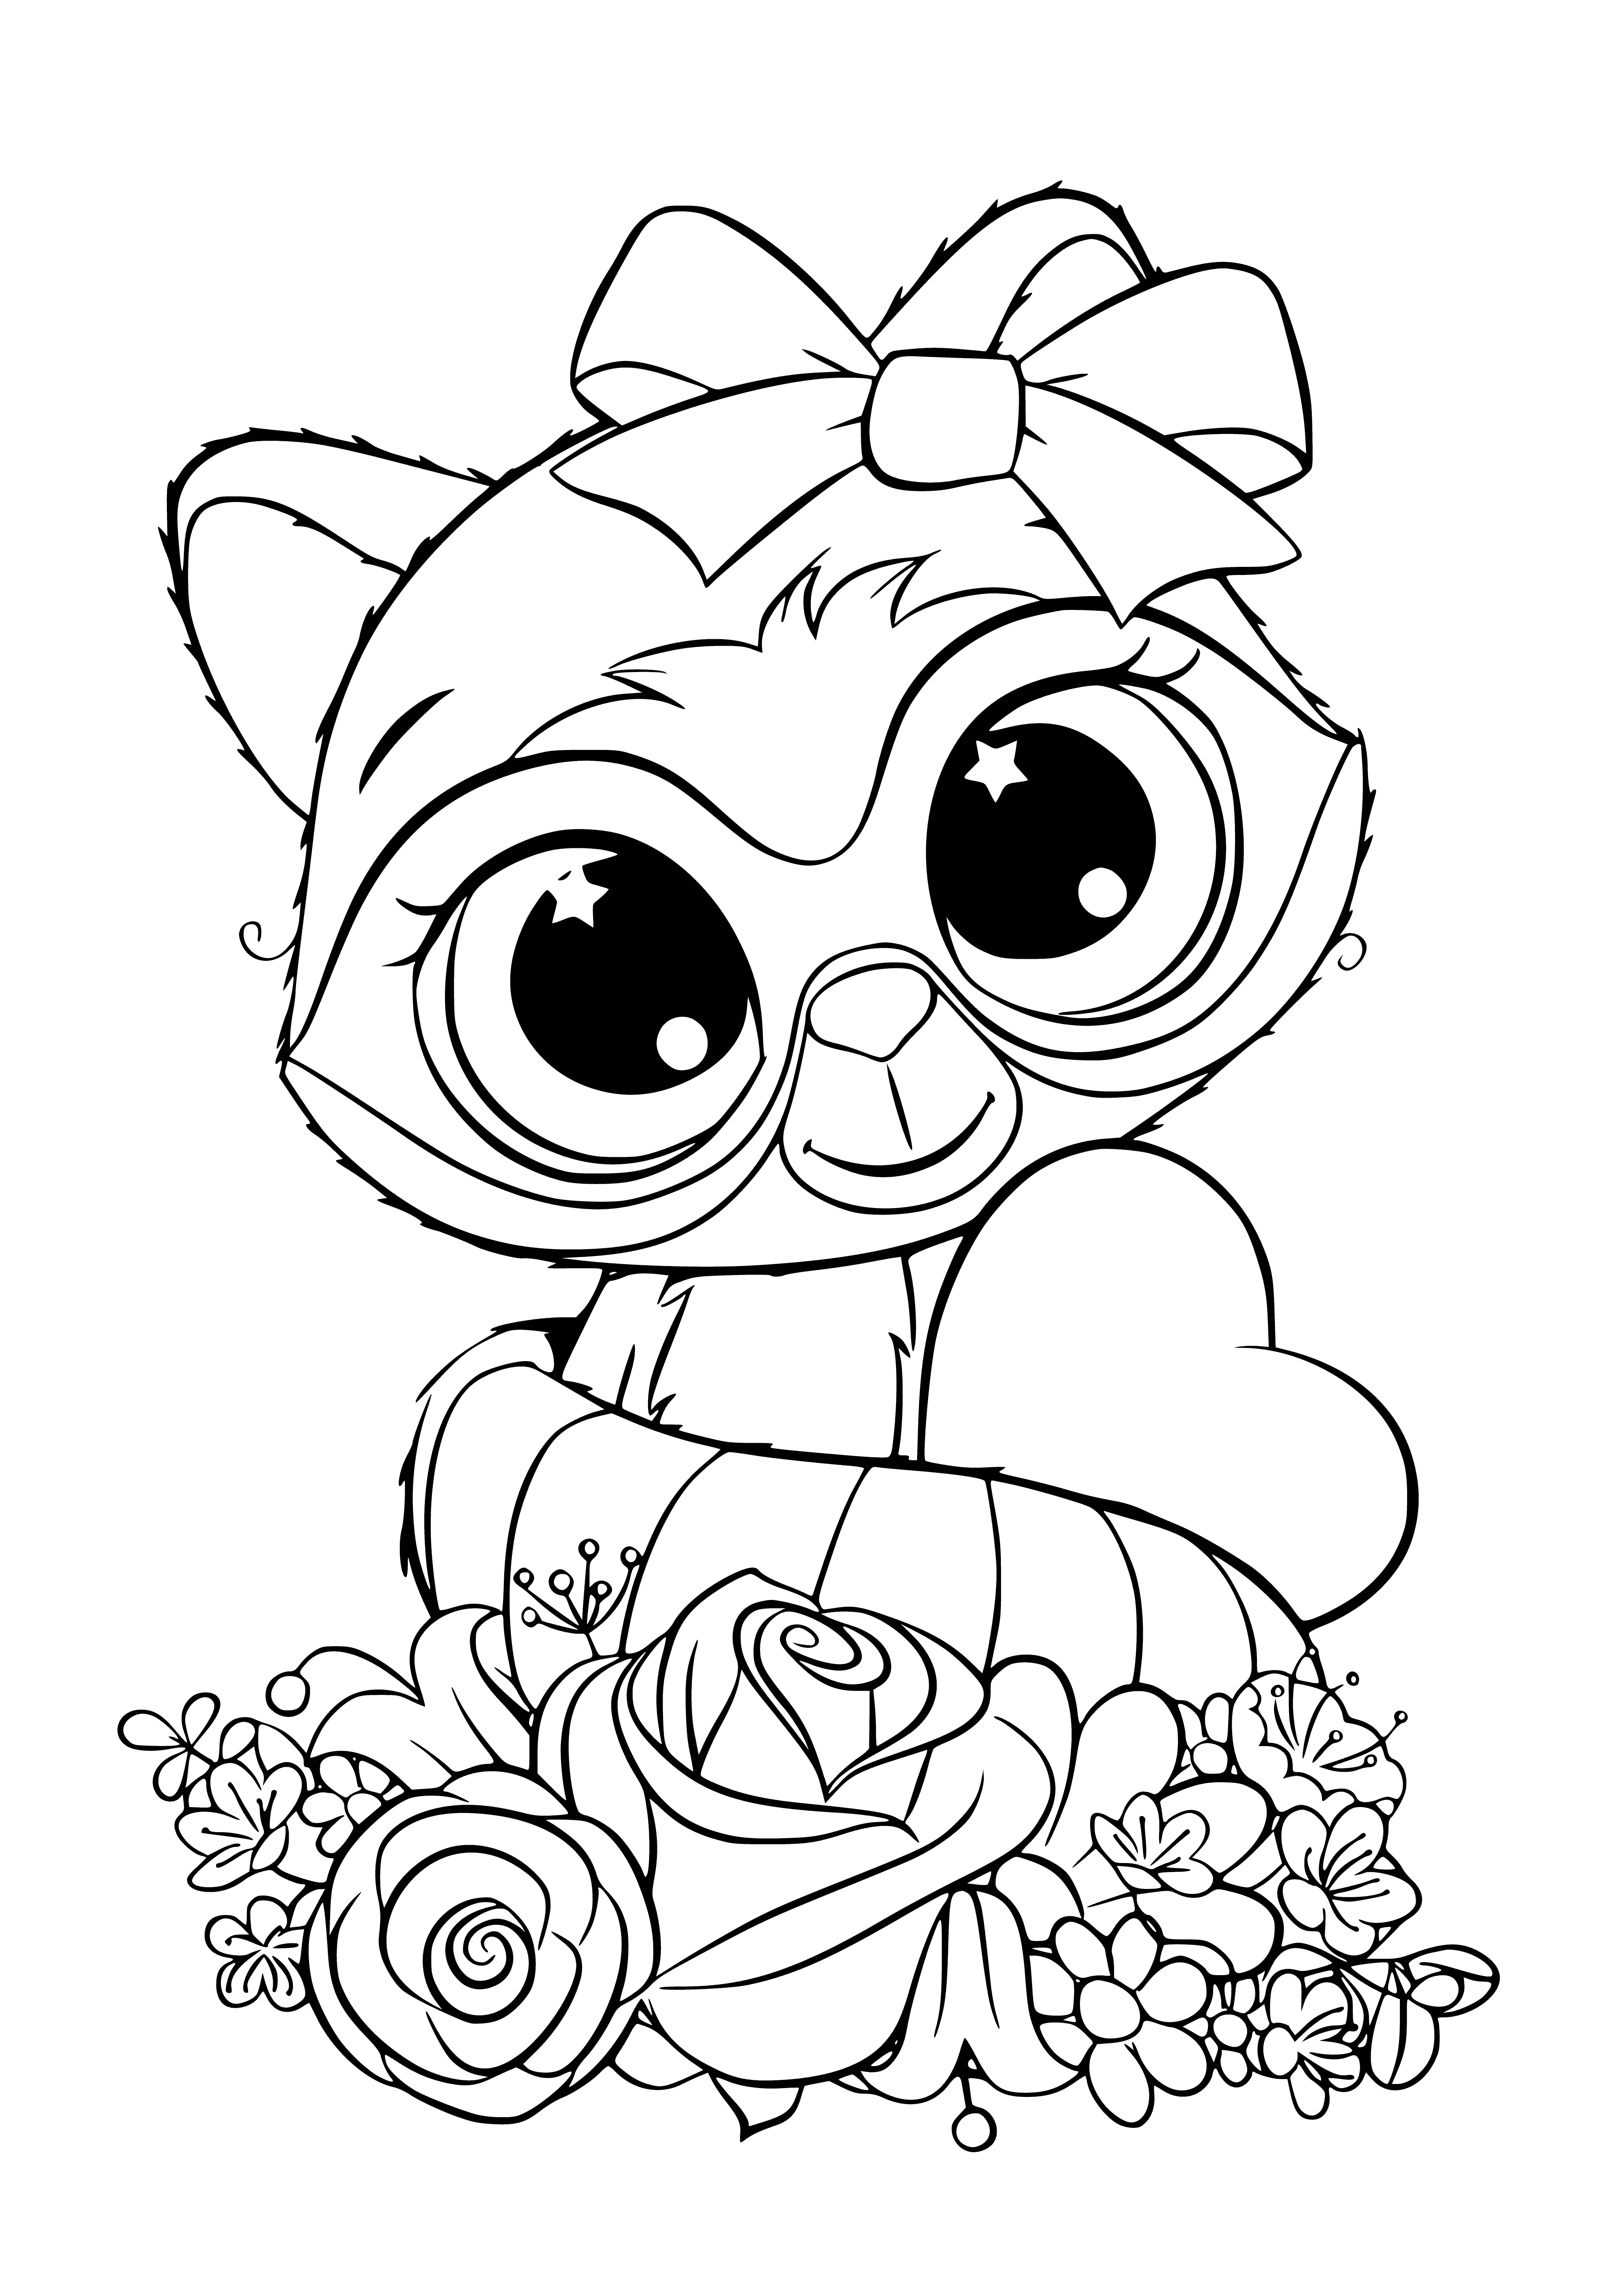 Cute raccoon coloring page